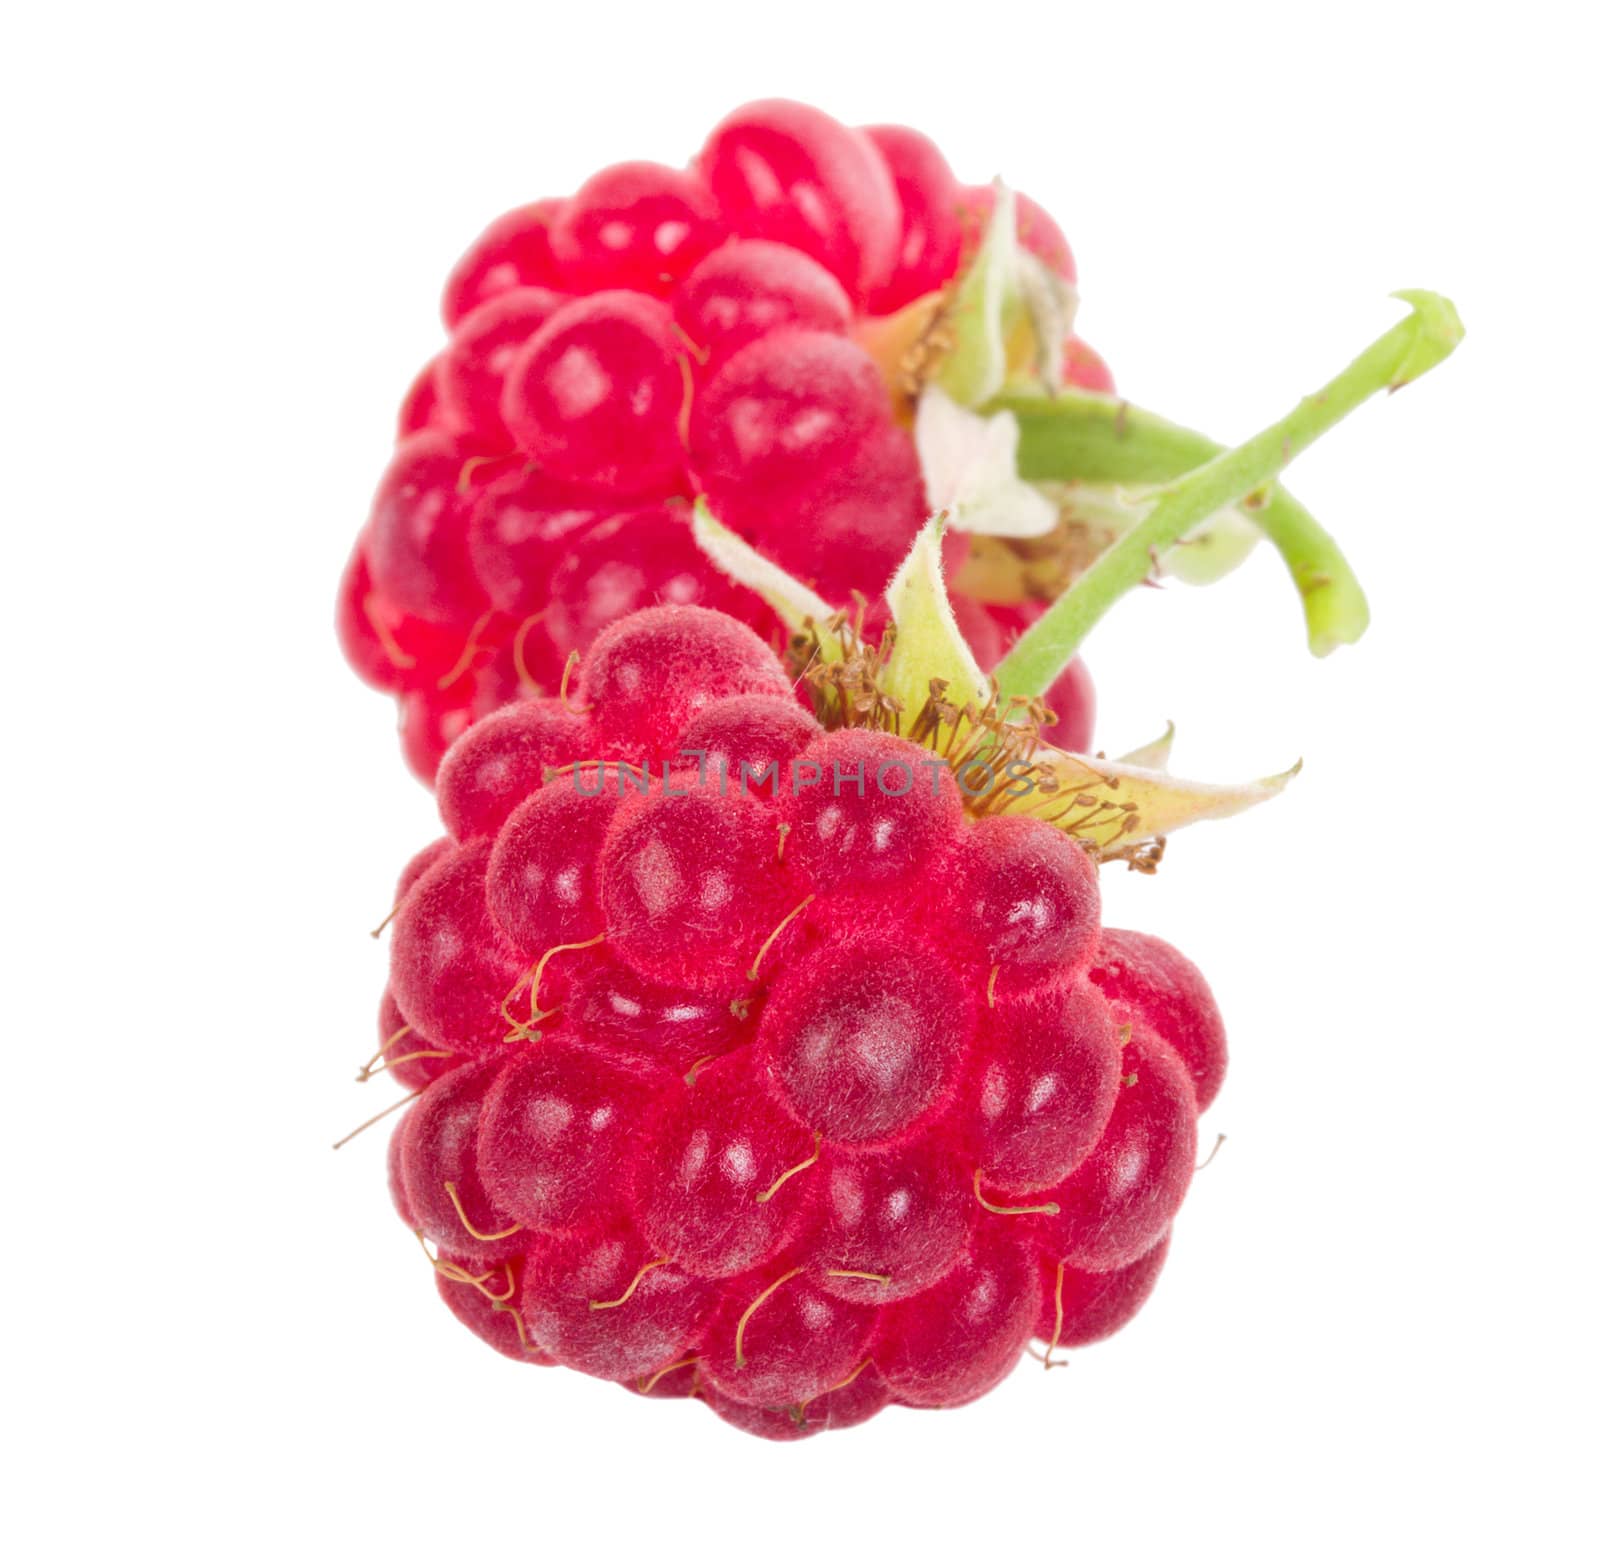 close-up ripe raspberry, isolated on white